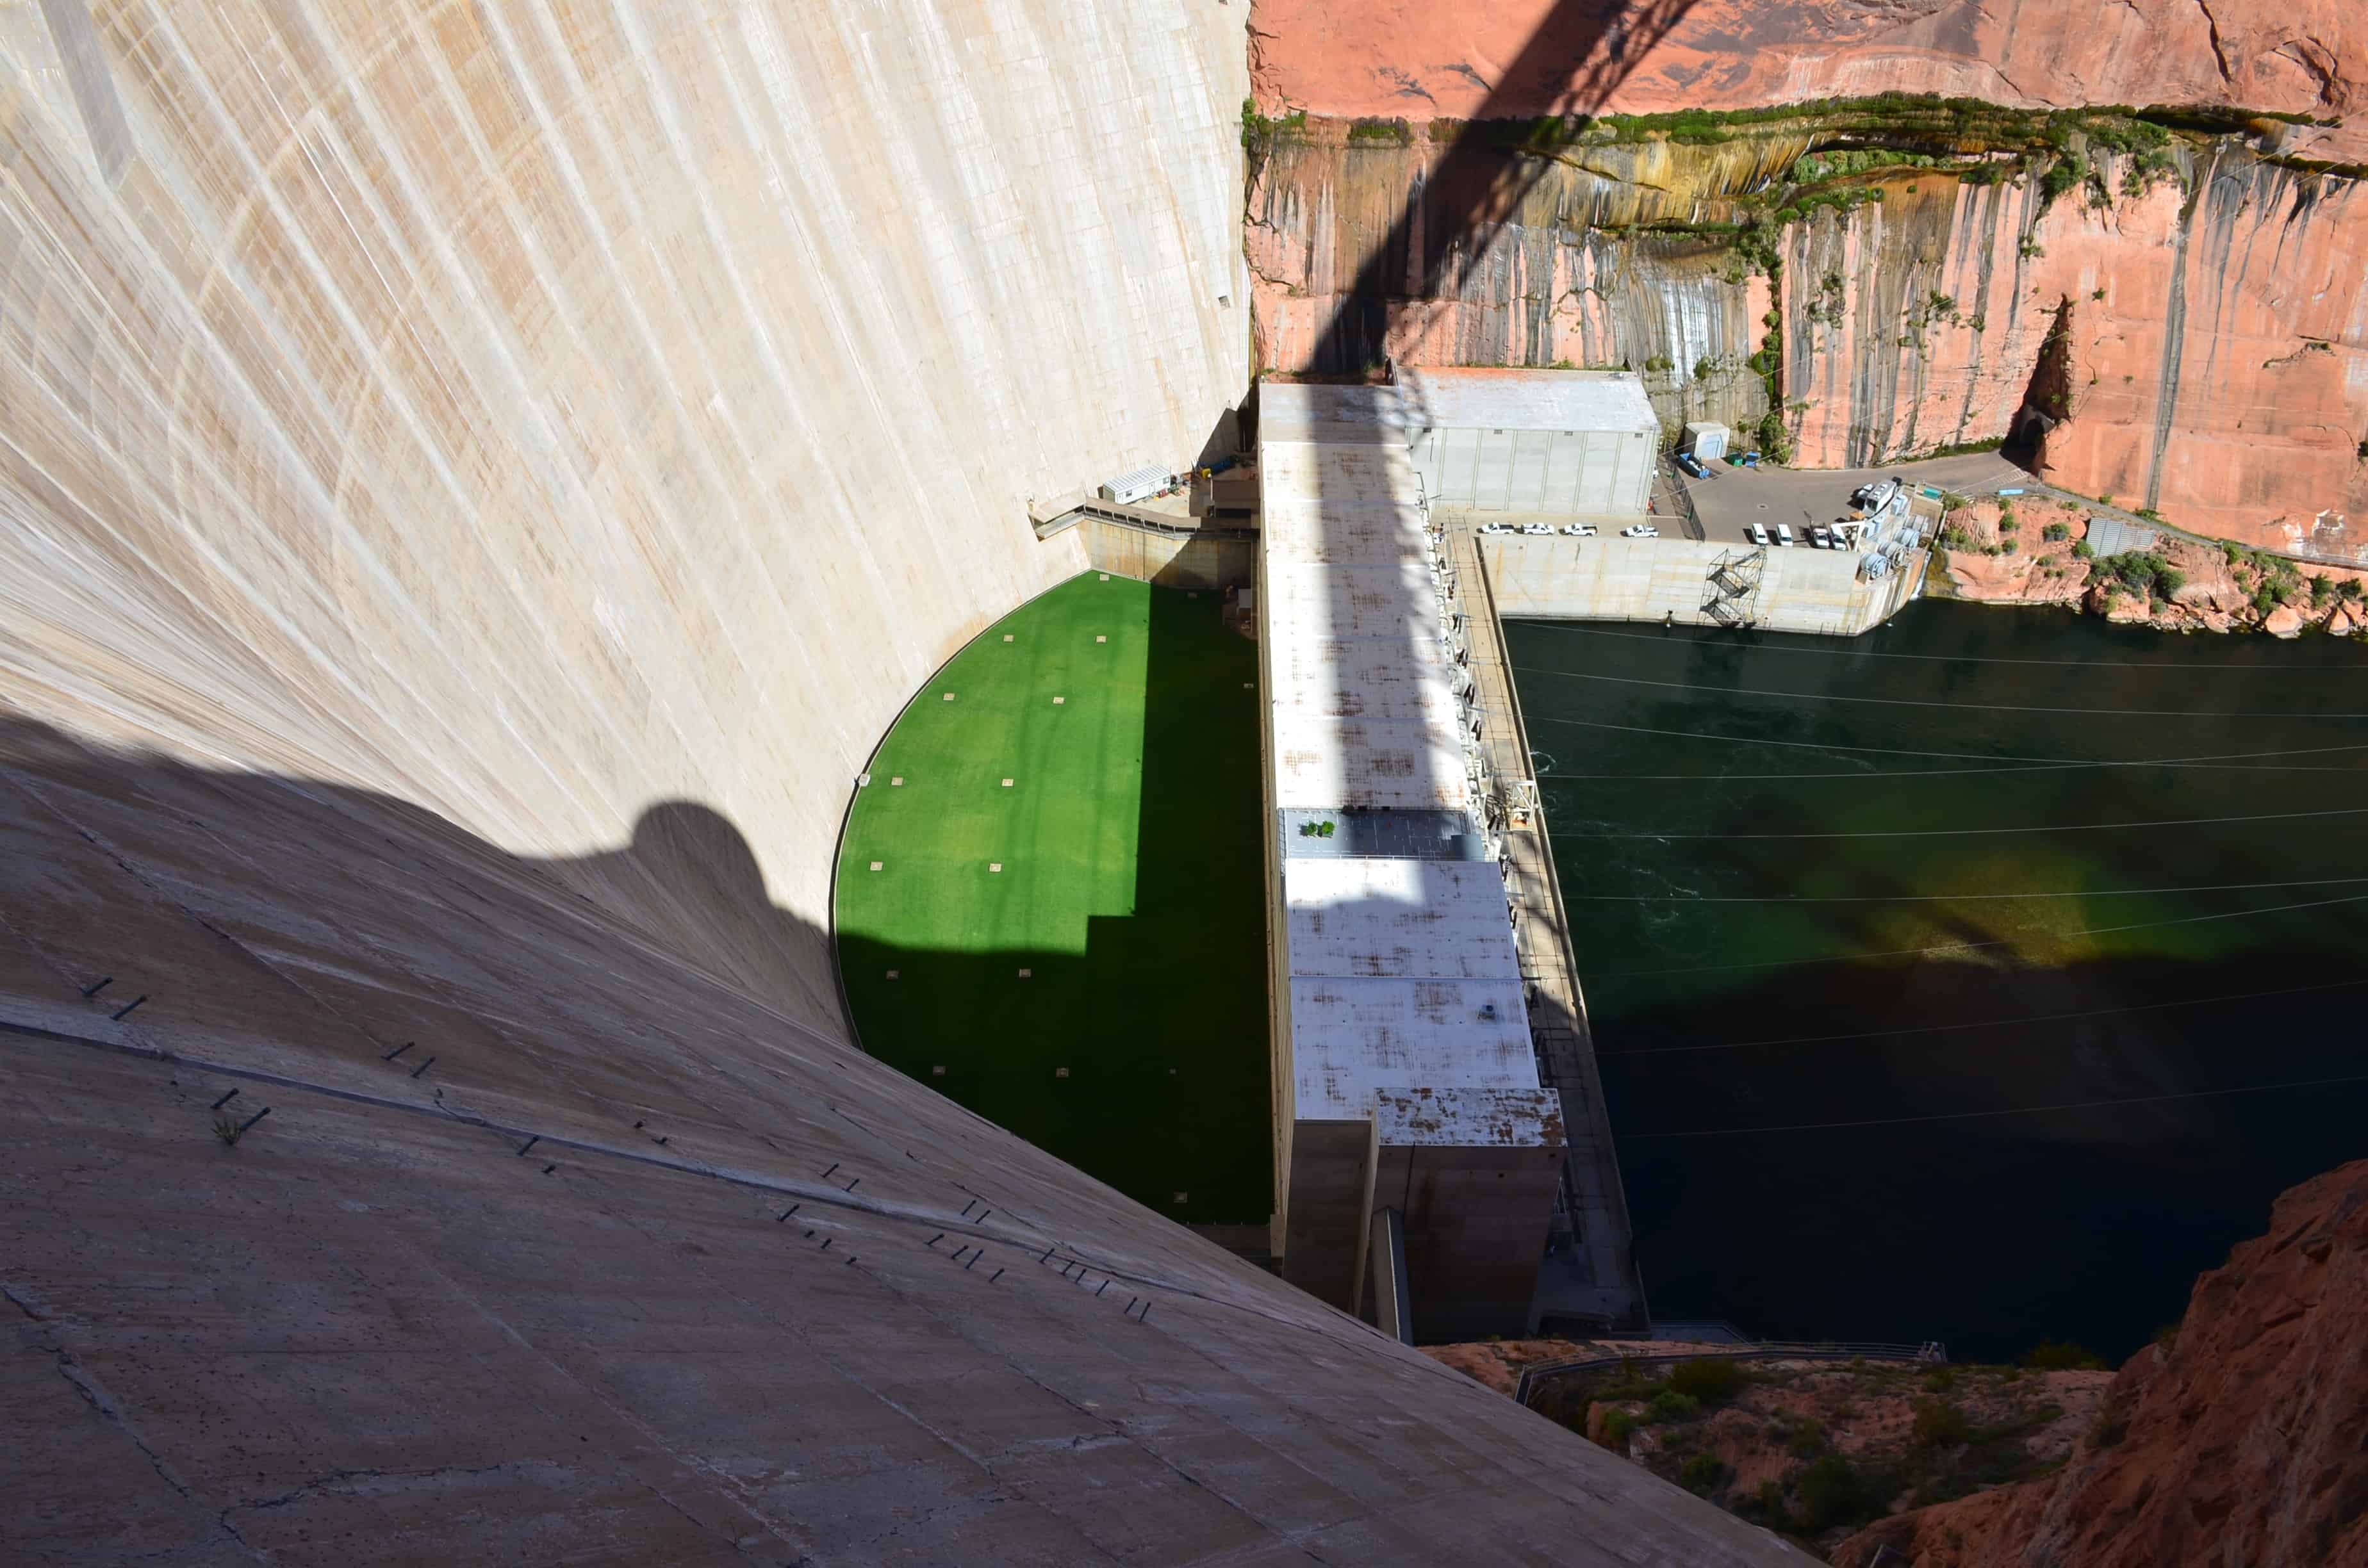 Power plant and grass field at Glen Canyon Dam at Glen Canyon National Recreation Area in Arizona